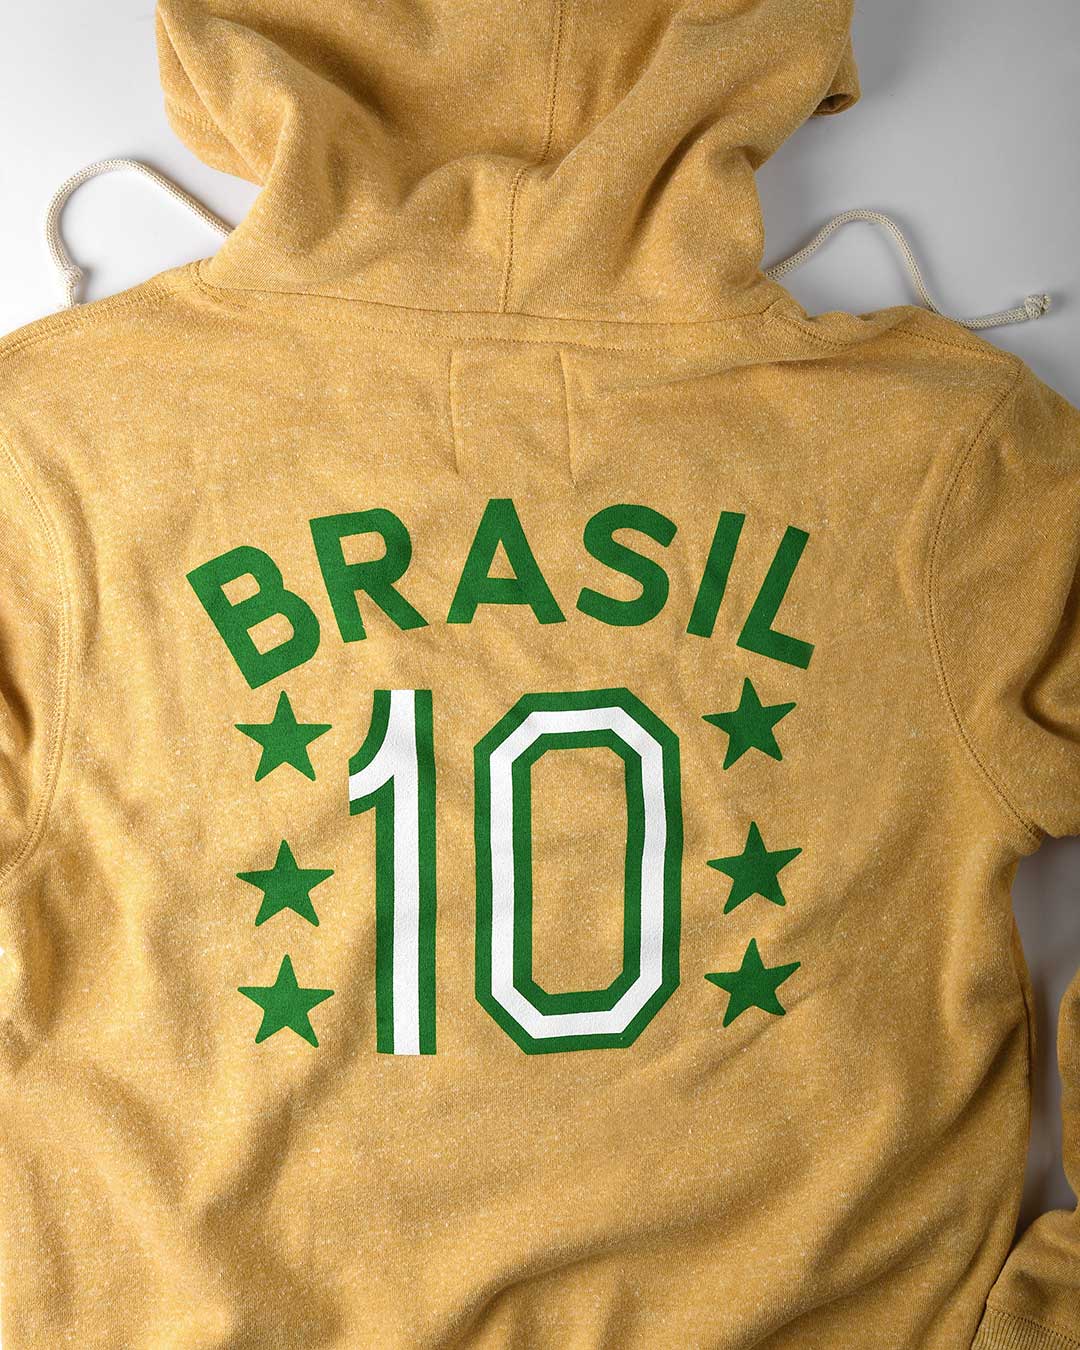 Pelé Brasil #10 Yellow Pullover Hoody - Roots of Fight